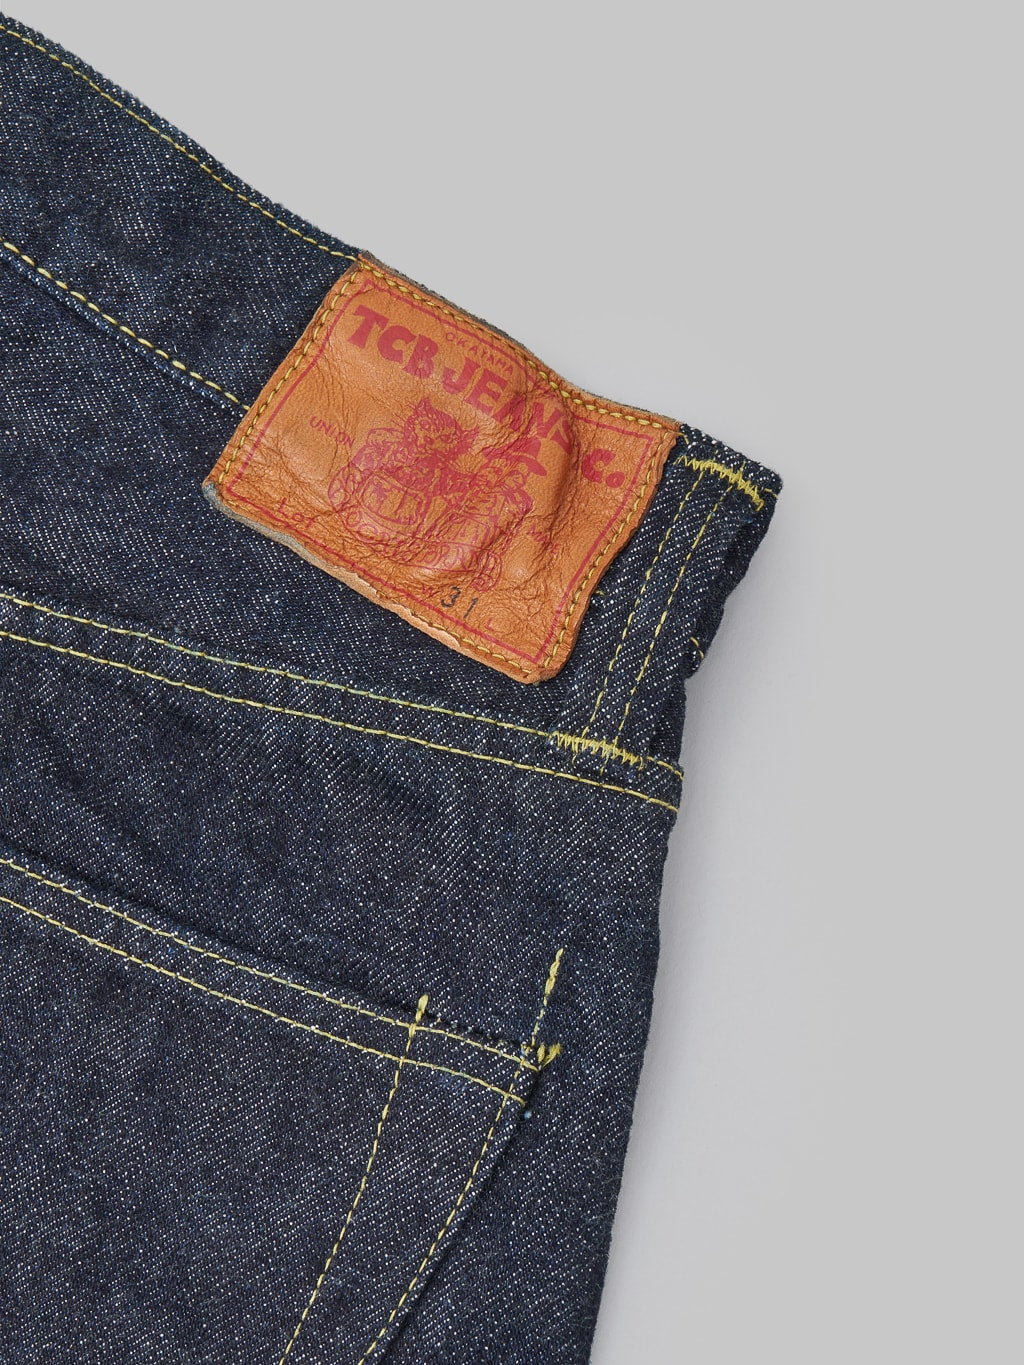 tcb s40s regular straight jeans brand patch